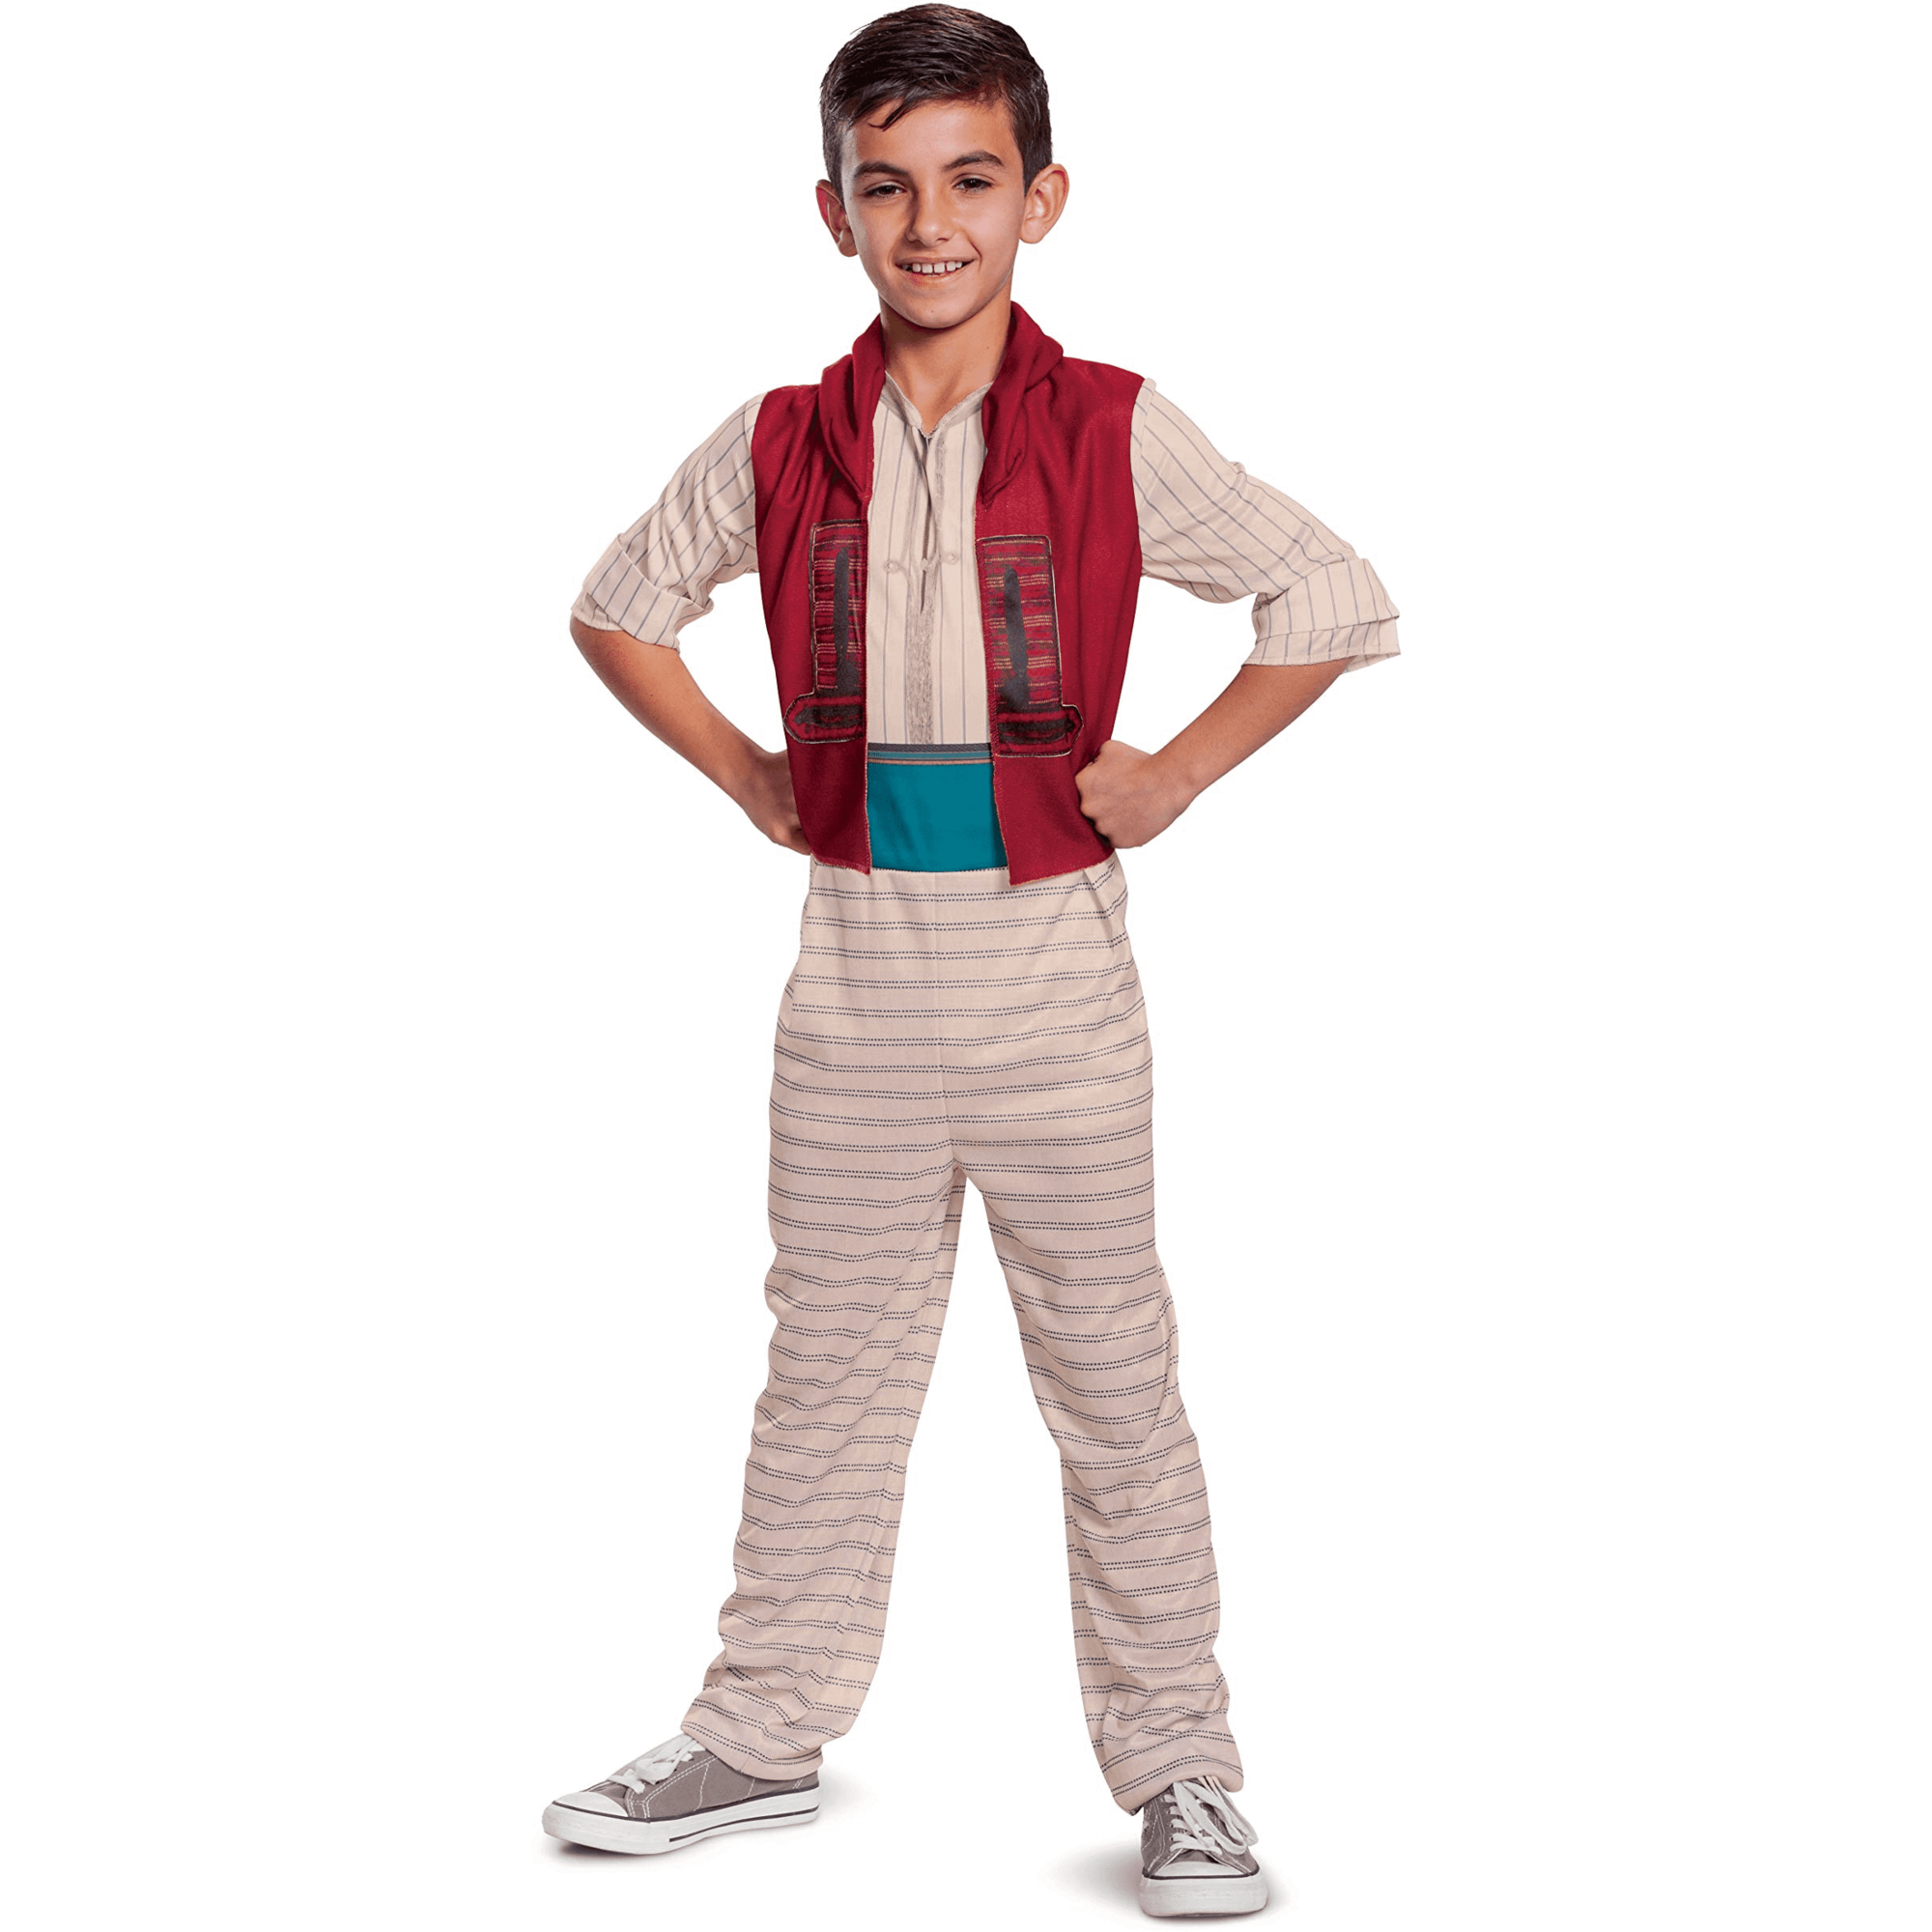 Ultimate Party Super Stores COSTUMES XS 3-4T Boy's Aladdin Classic Costume